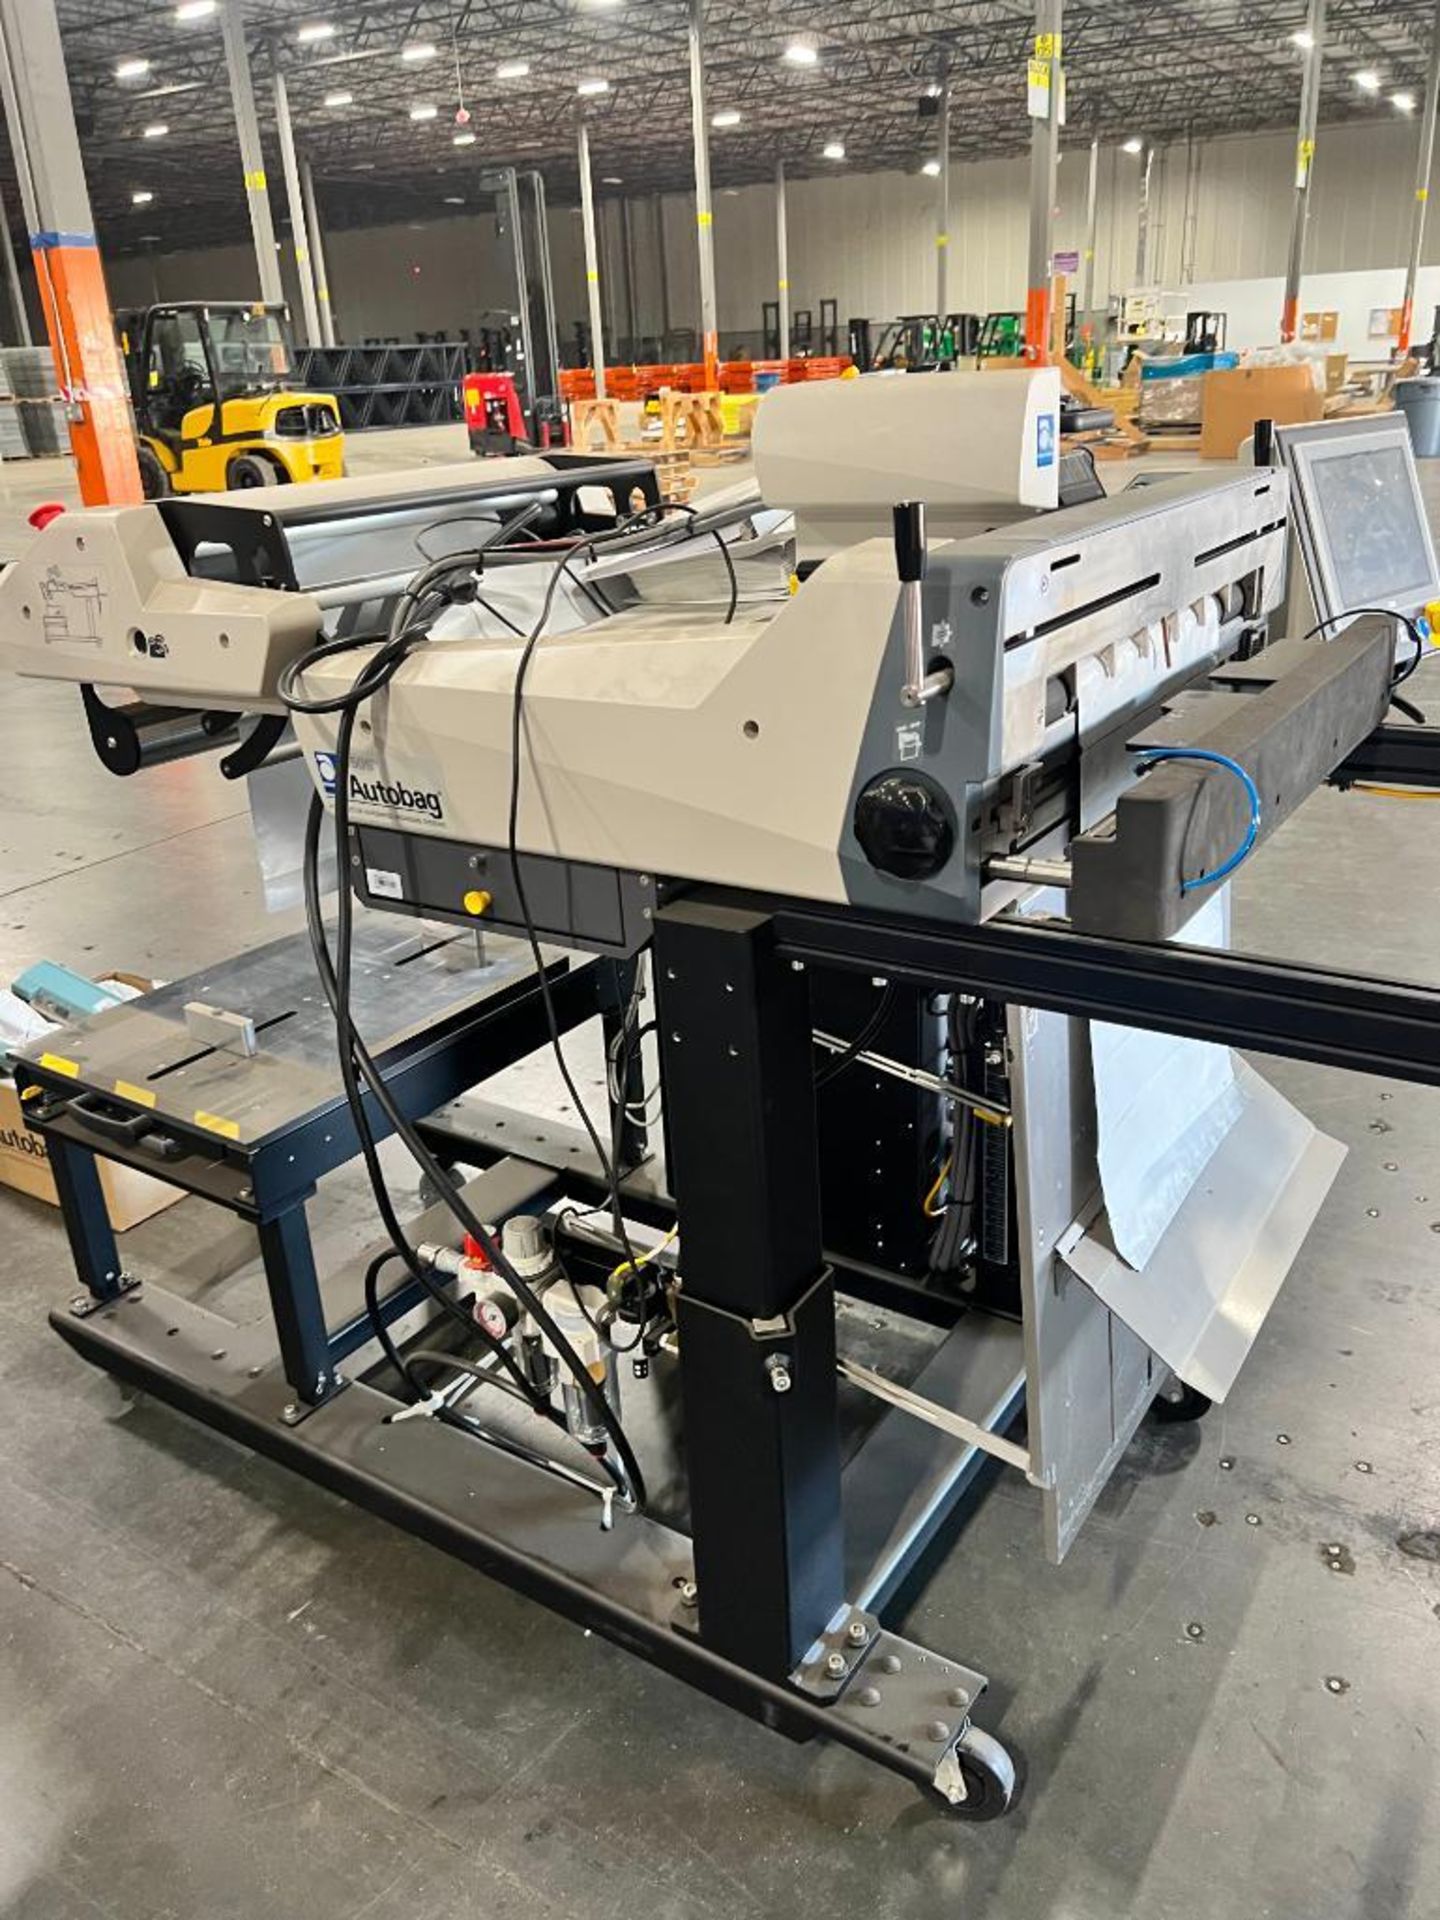 2020 Autobag 850S Mail Order Fulfillment Bagger, Automated Packaging System, Auto Bag Mail, Order Fu - Image 3 of 9